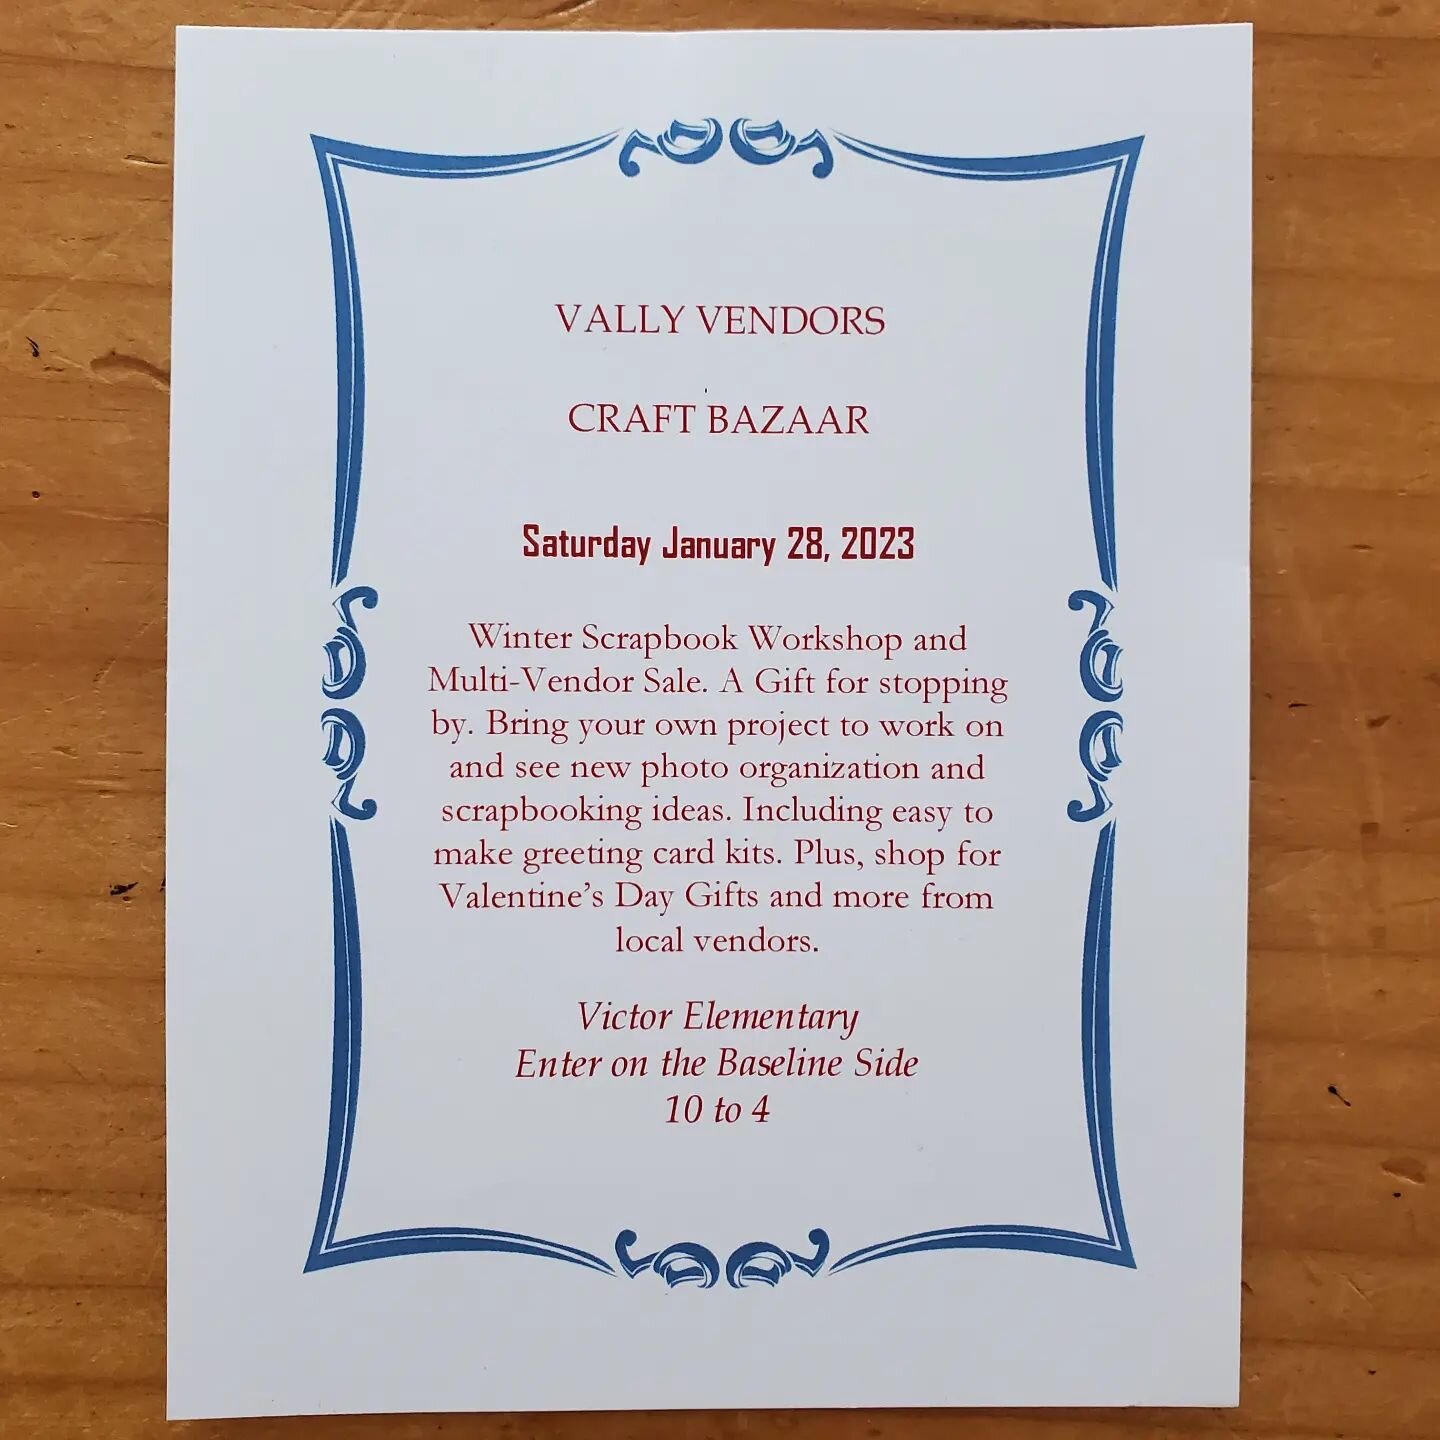 Need a Valentine's Day gift?  Several talented artisans will be at the Victor Elementary School this Saturday from 10am to 4pm. Come and say hello!